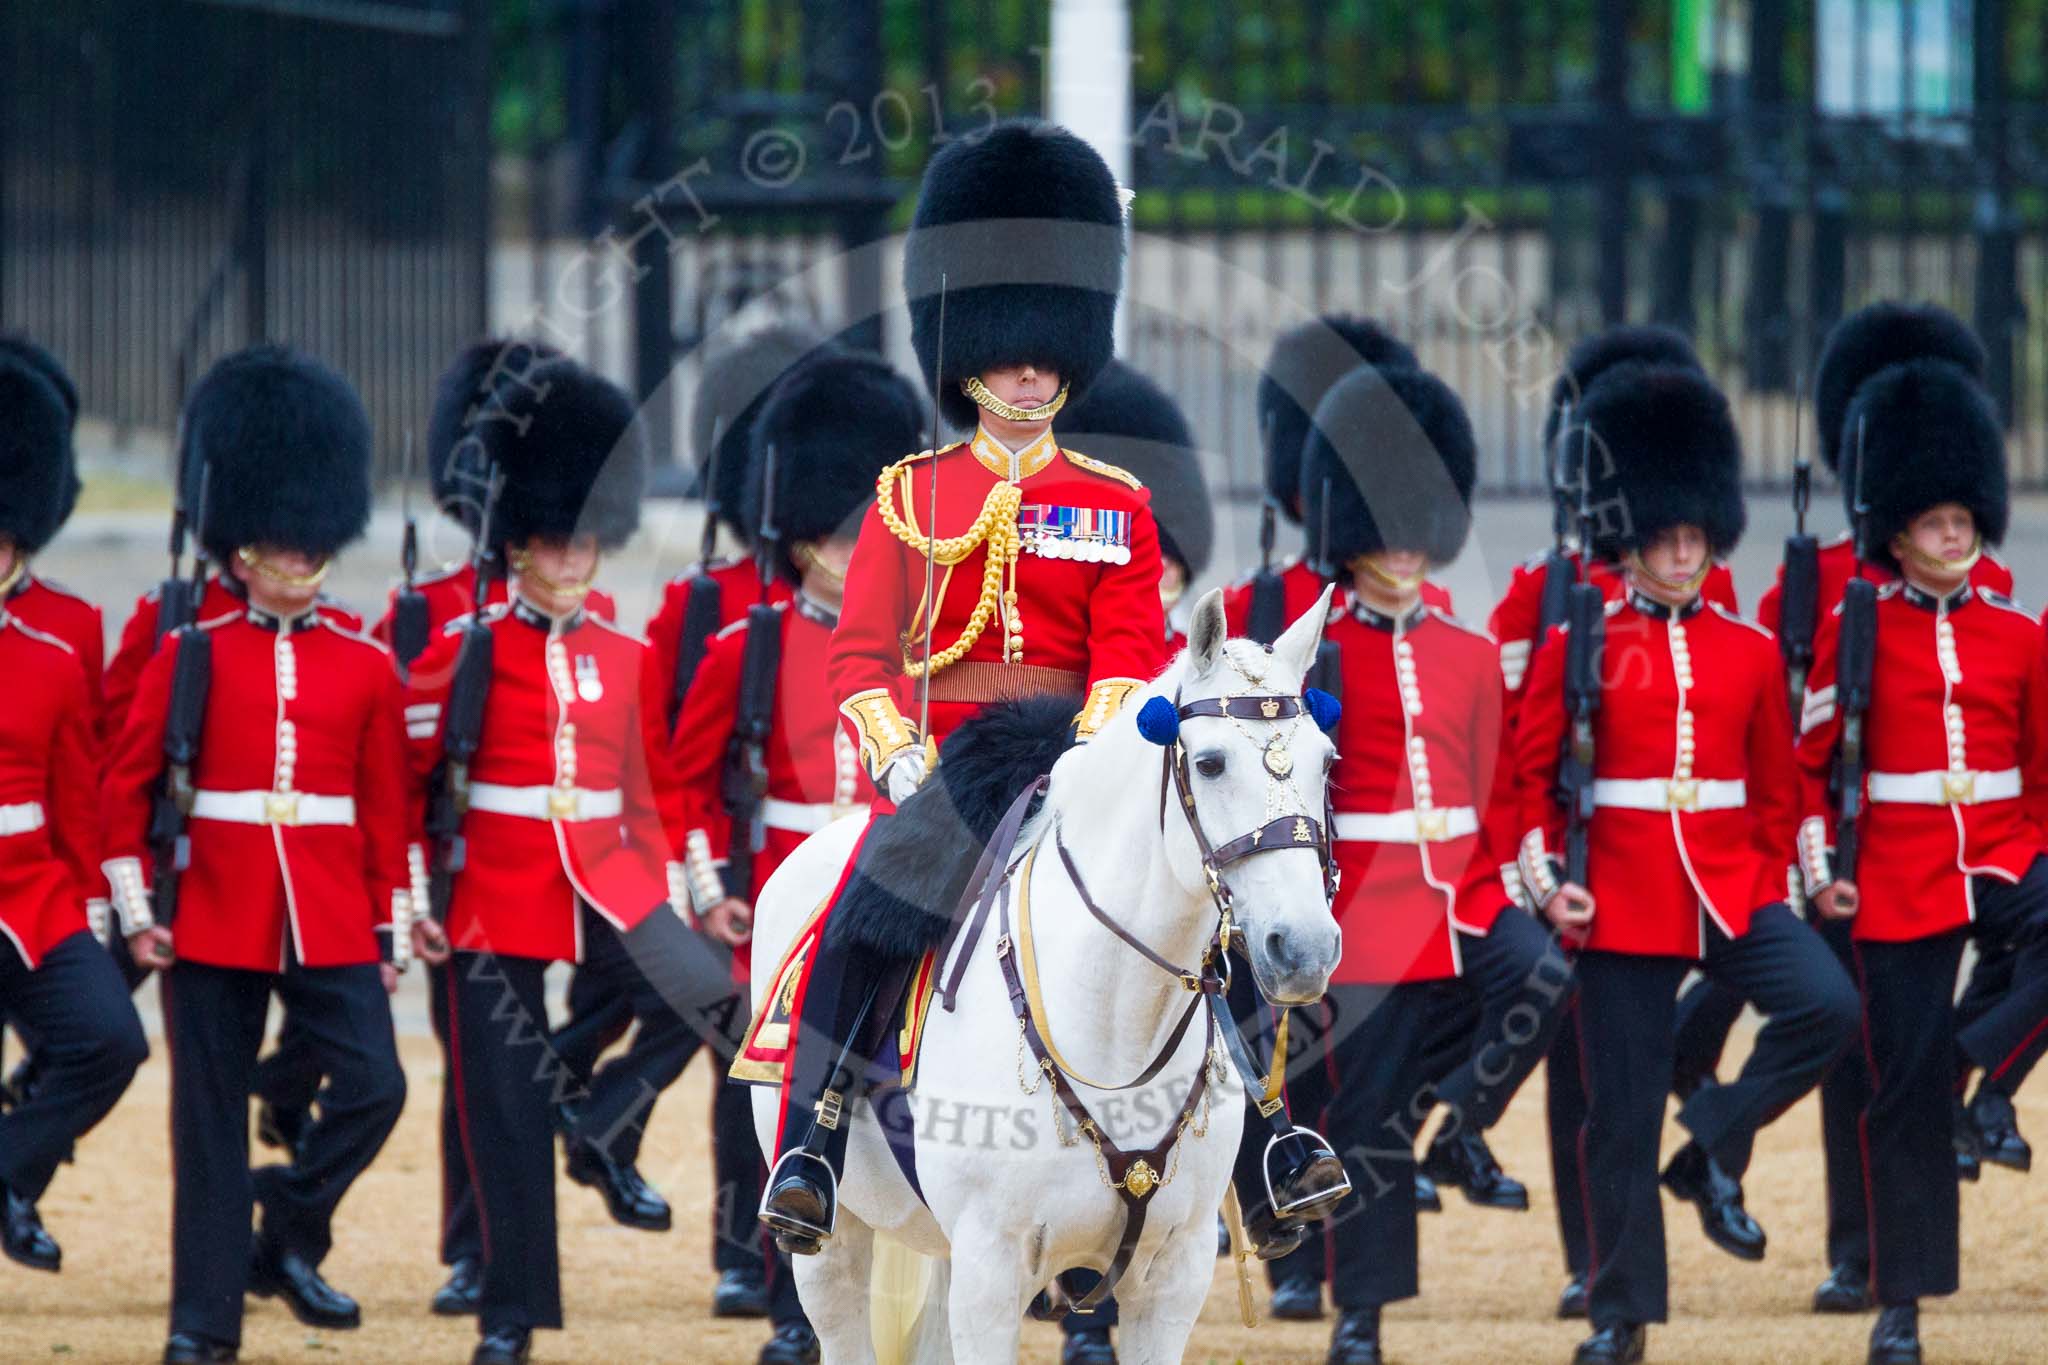 Trooping the Colour 2015. Image #213, 13 June 2015 10:56 Horse Guards Parade, London, UK